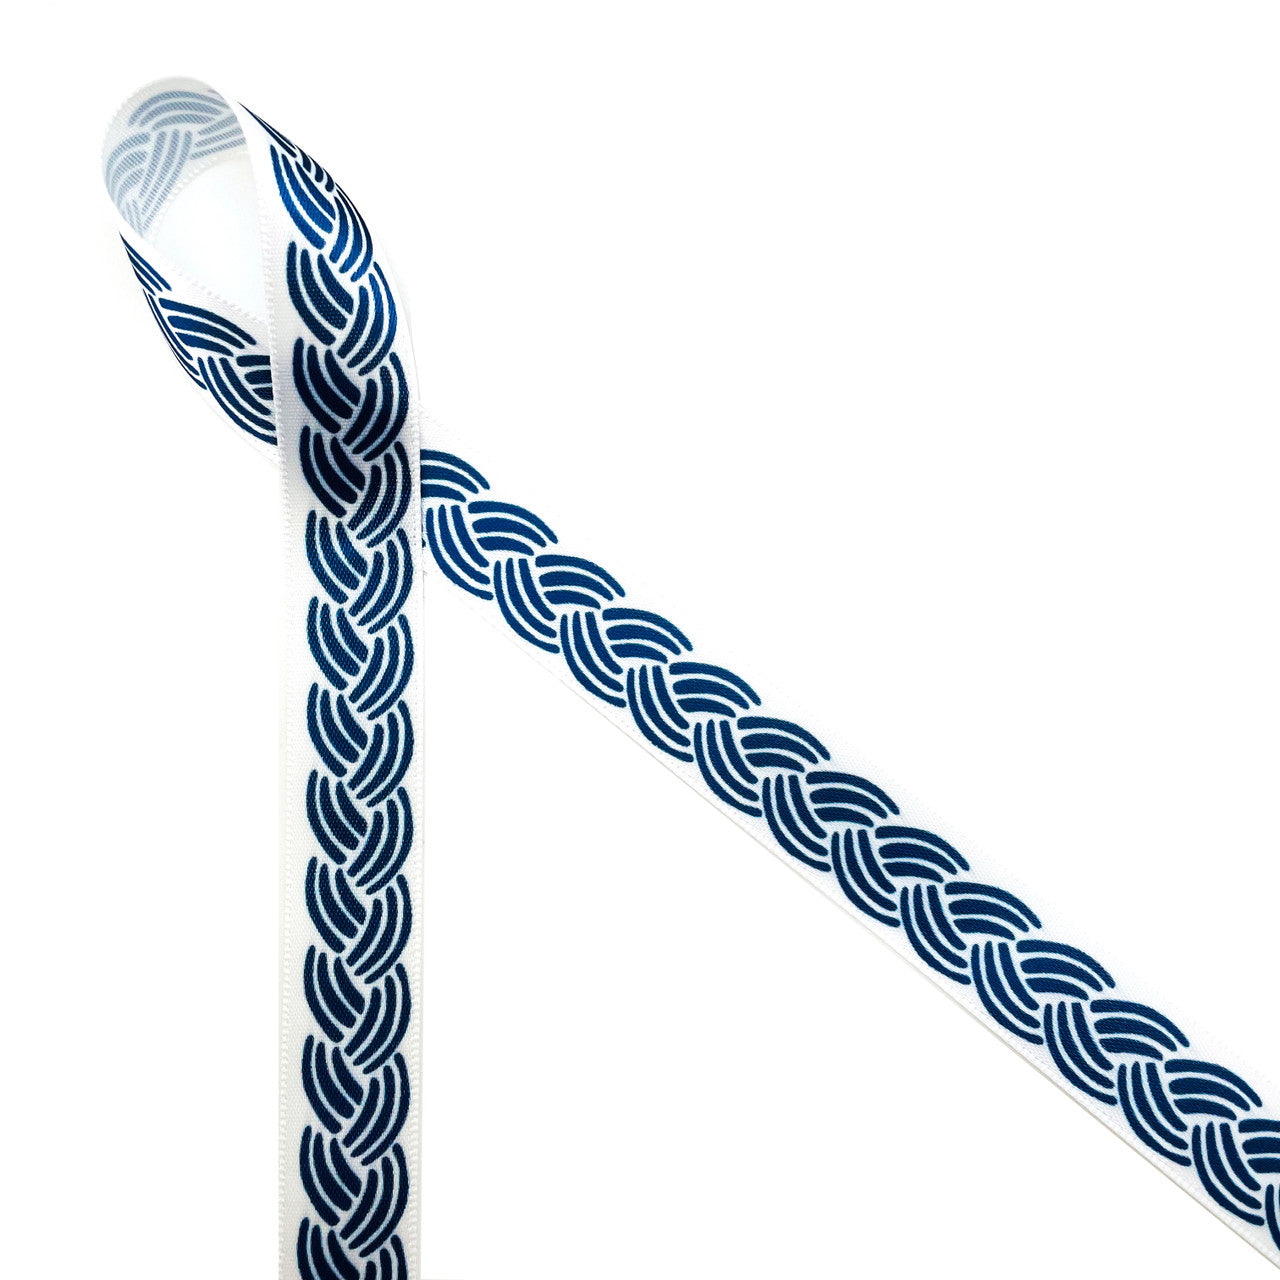 Nautical rope ribbon fun for party favors, gift wrap, gift baskets